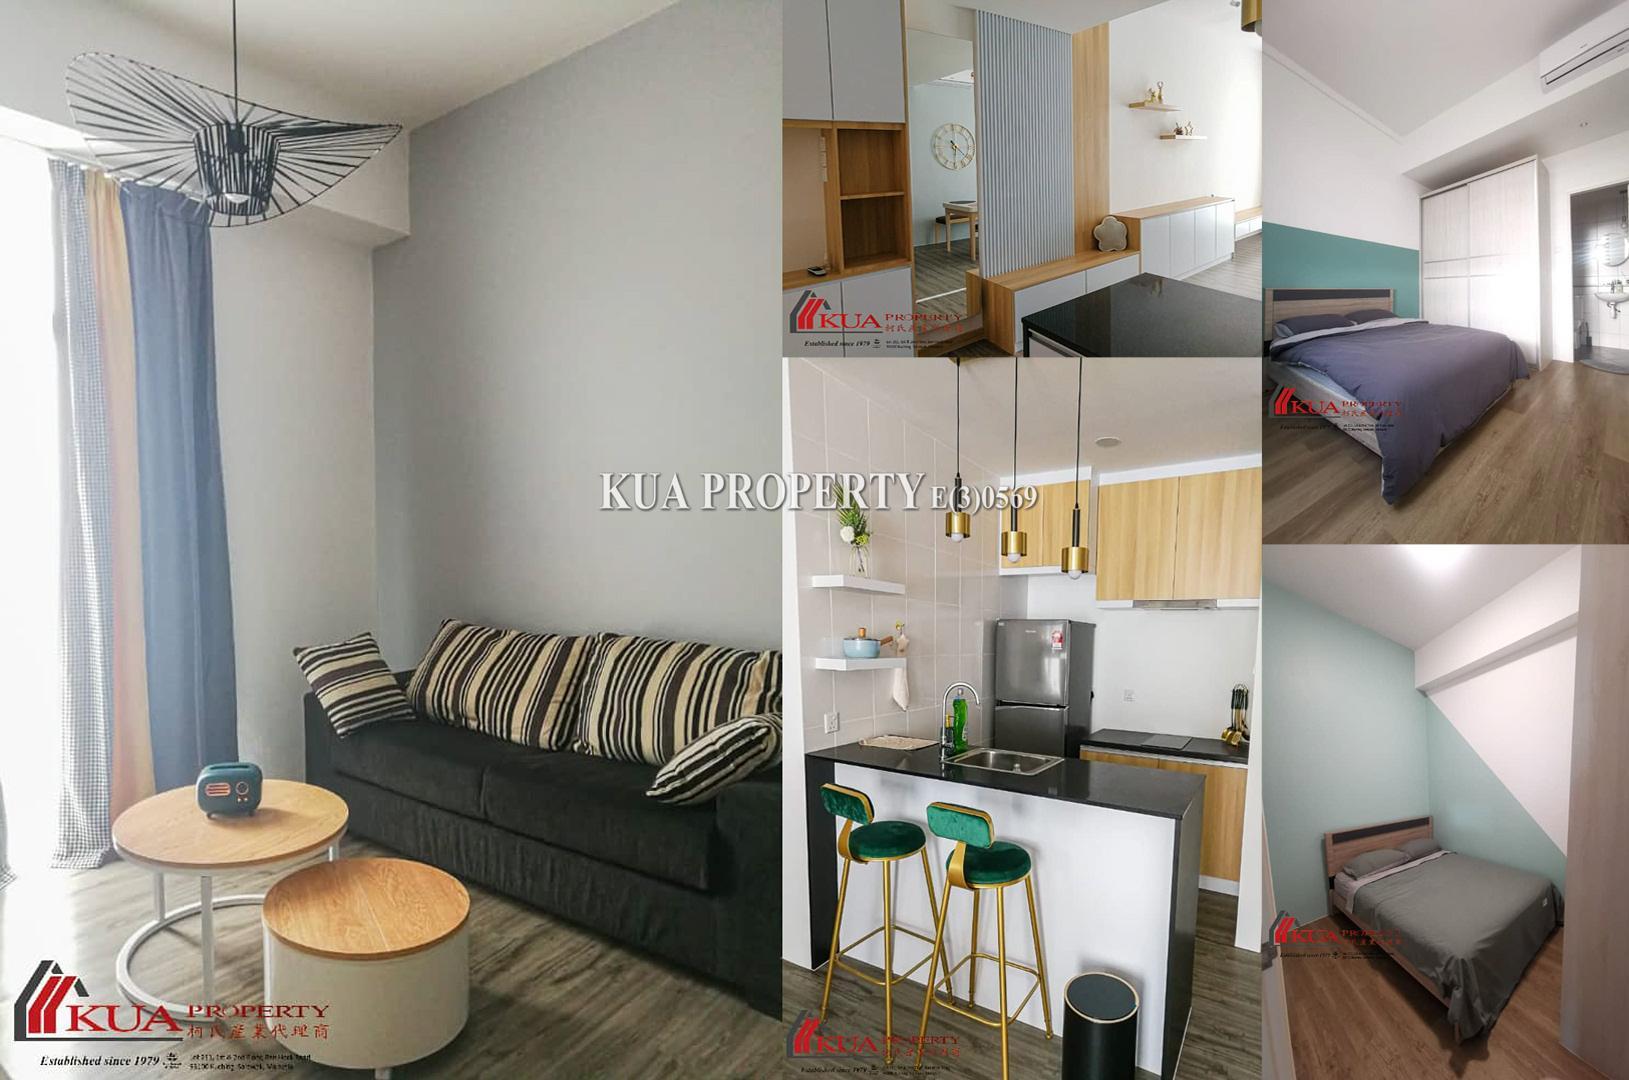 Laticube Apartment For Rent! at 3rd Mile, Everbright Park